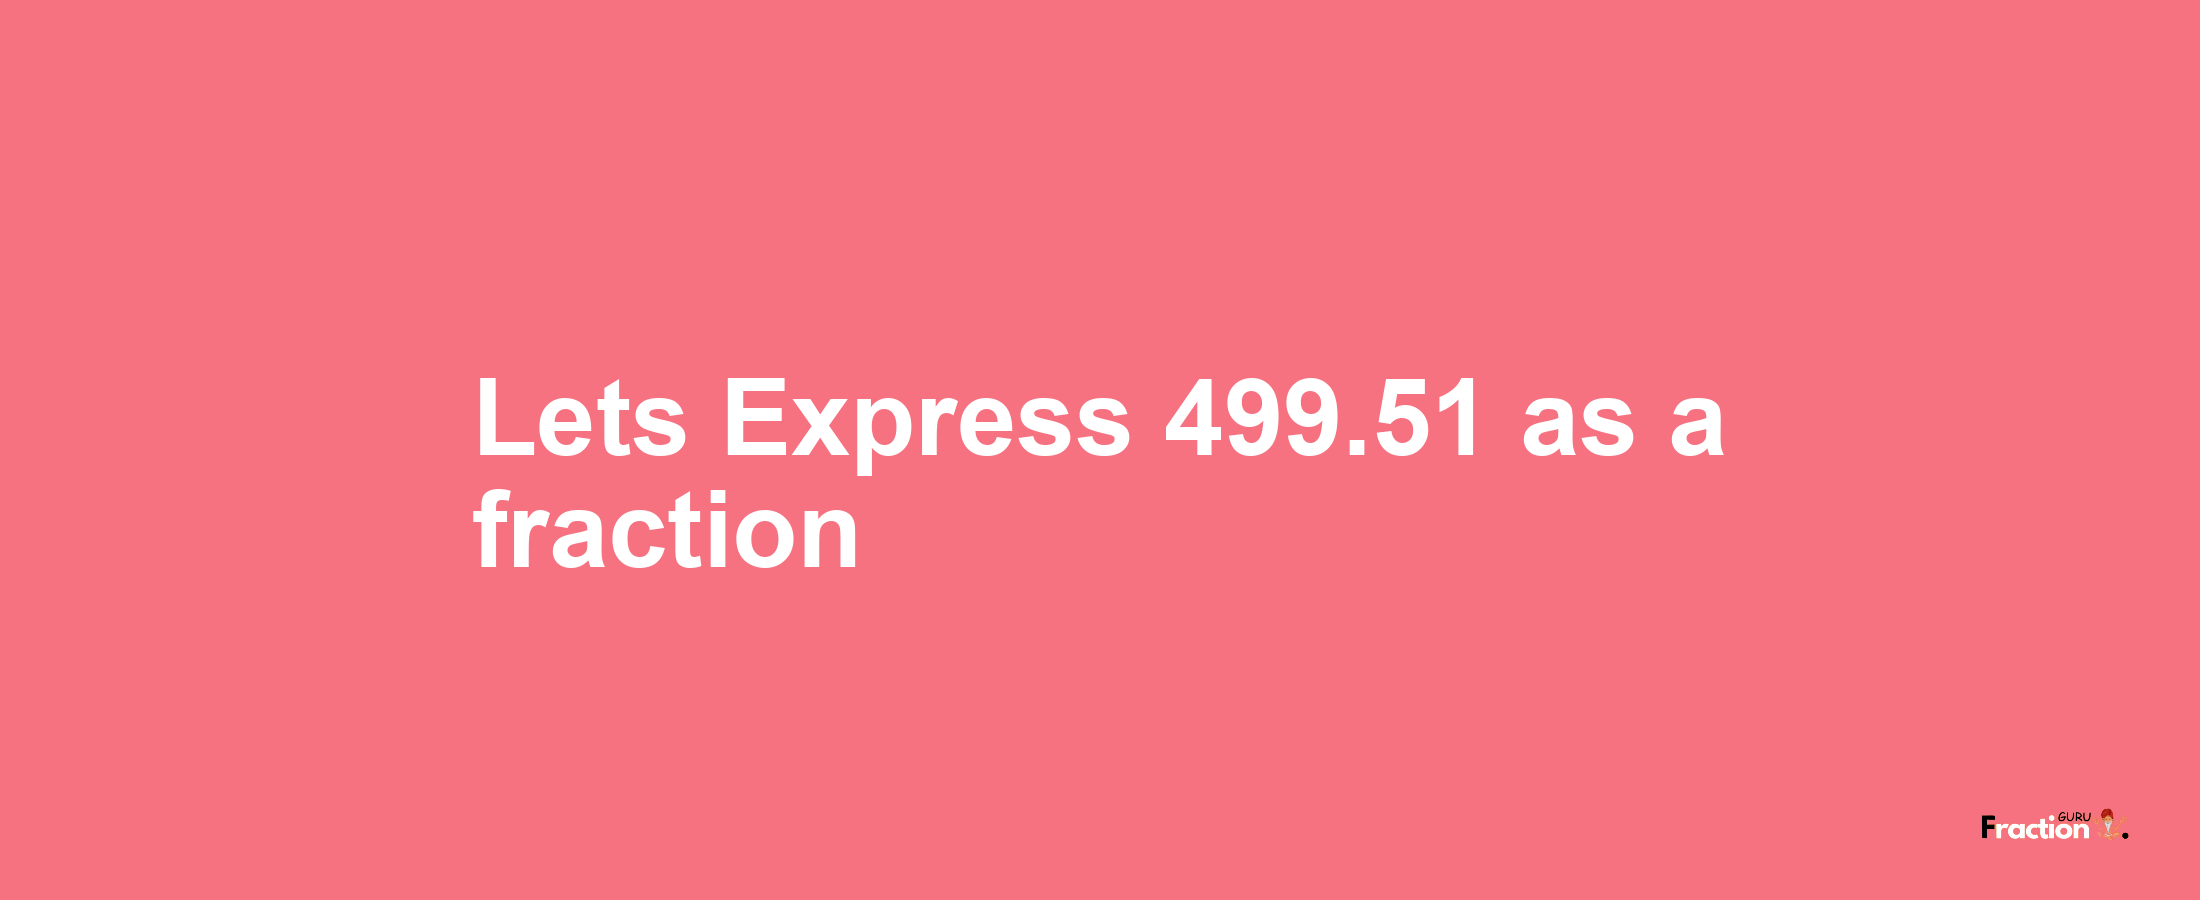 Lets Express 499.51 as afraction